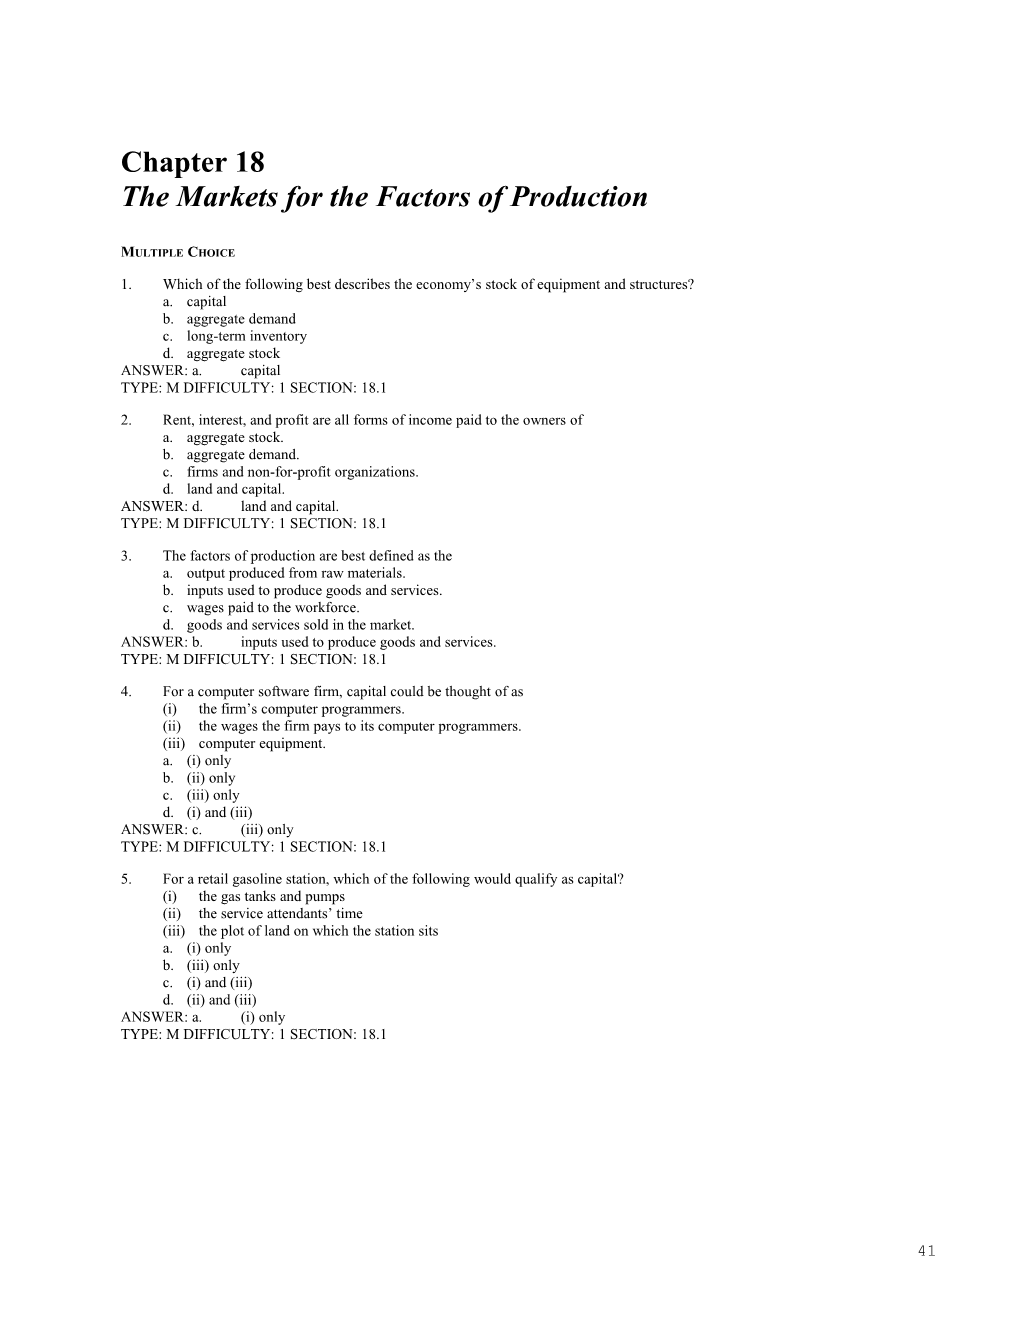 Chapter 18/The Markets for the Factors of Production 1